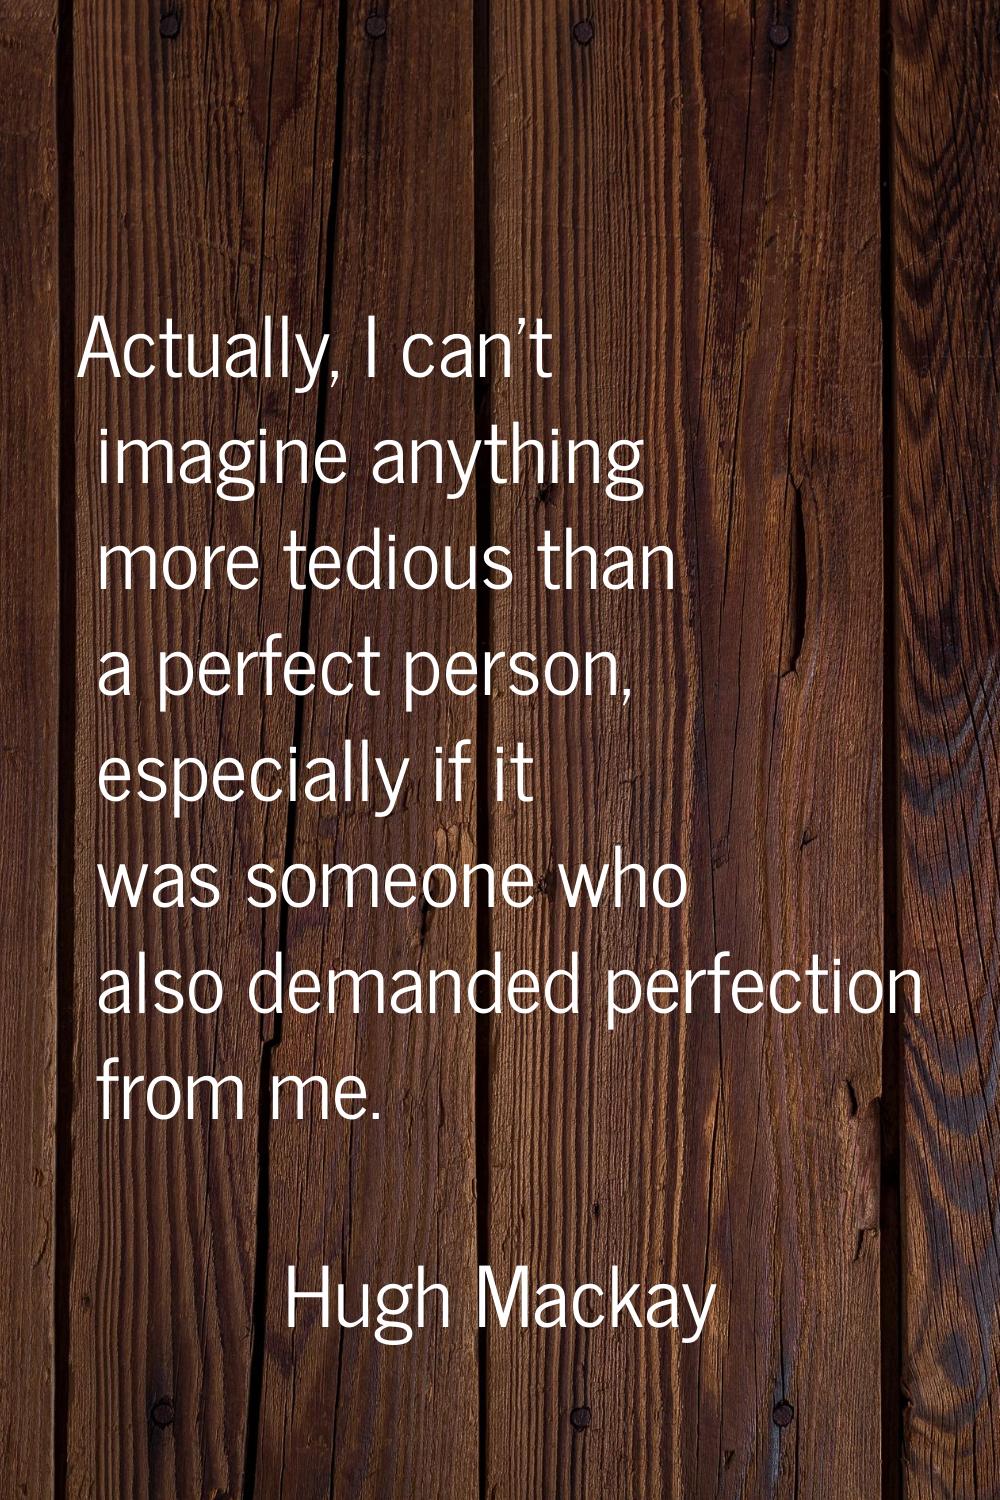 Actually, I can't imagine anything more tedious than a perfect person, especially if it was someone